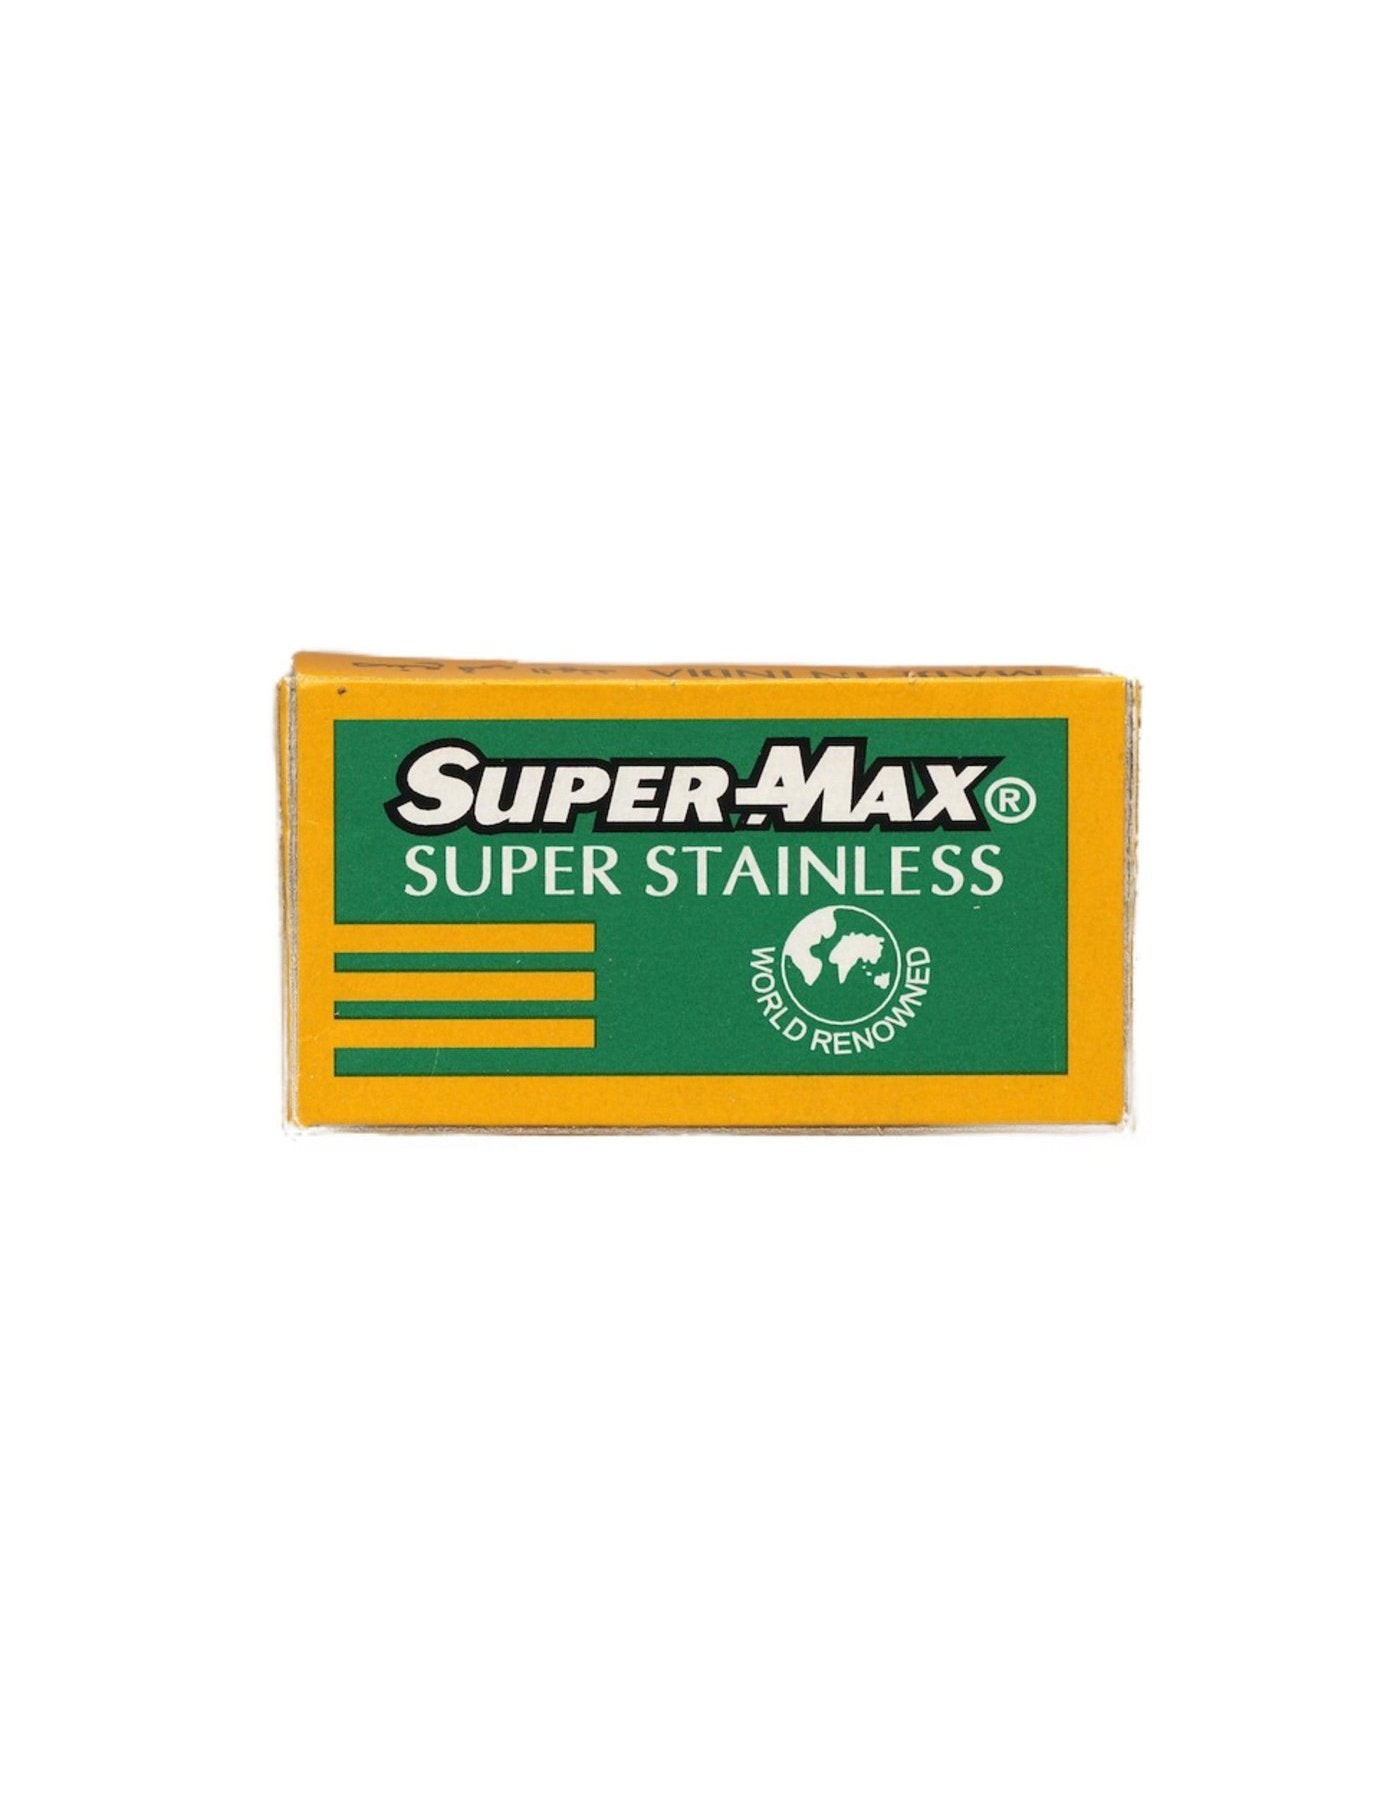 Product image 3 for SuperMax Super Stainless Steel Double Edge Razor Blades